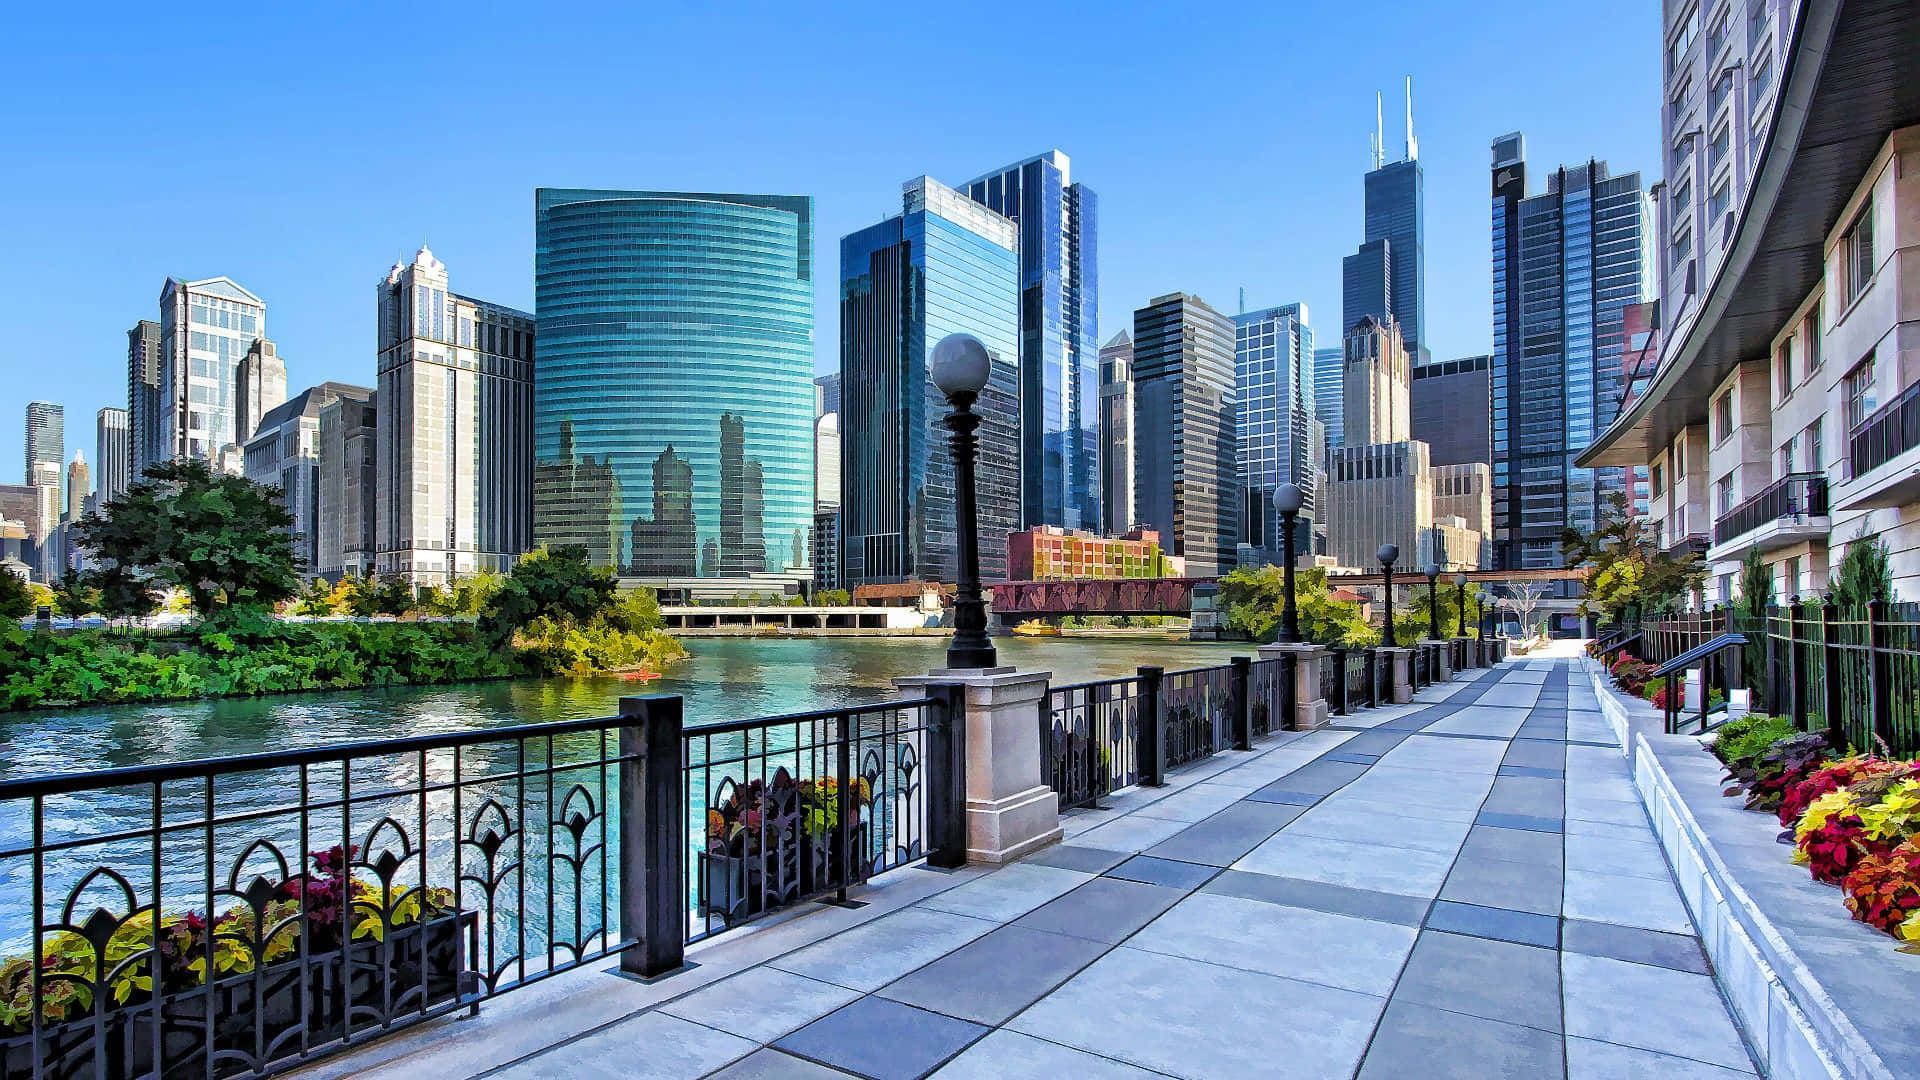 Enjoy stunning views of the iconic skyline of Chicago.